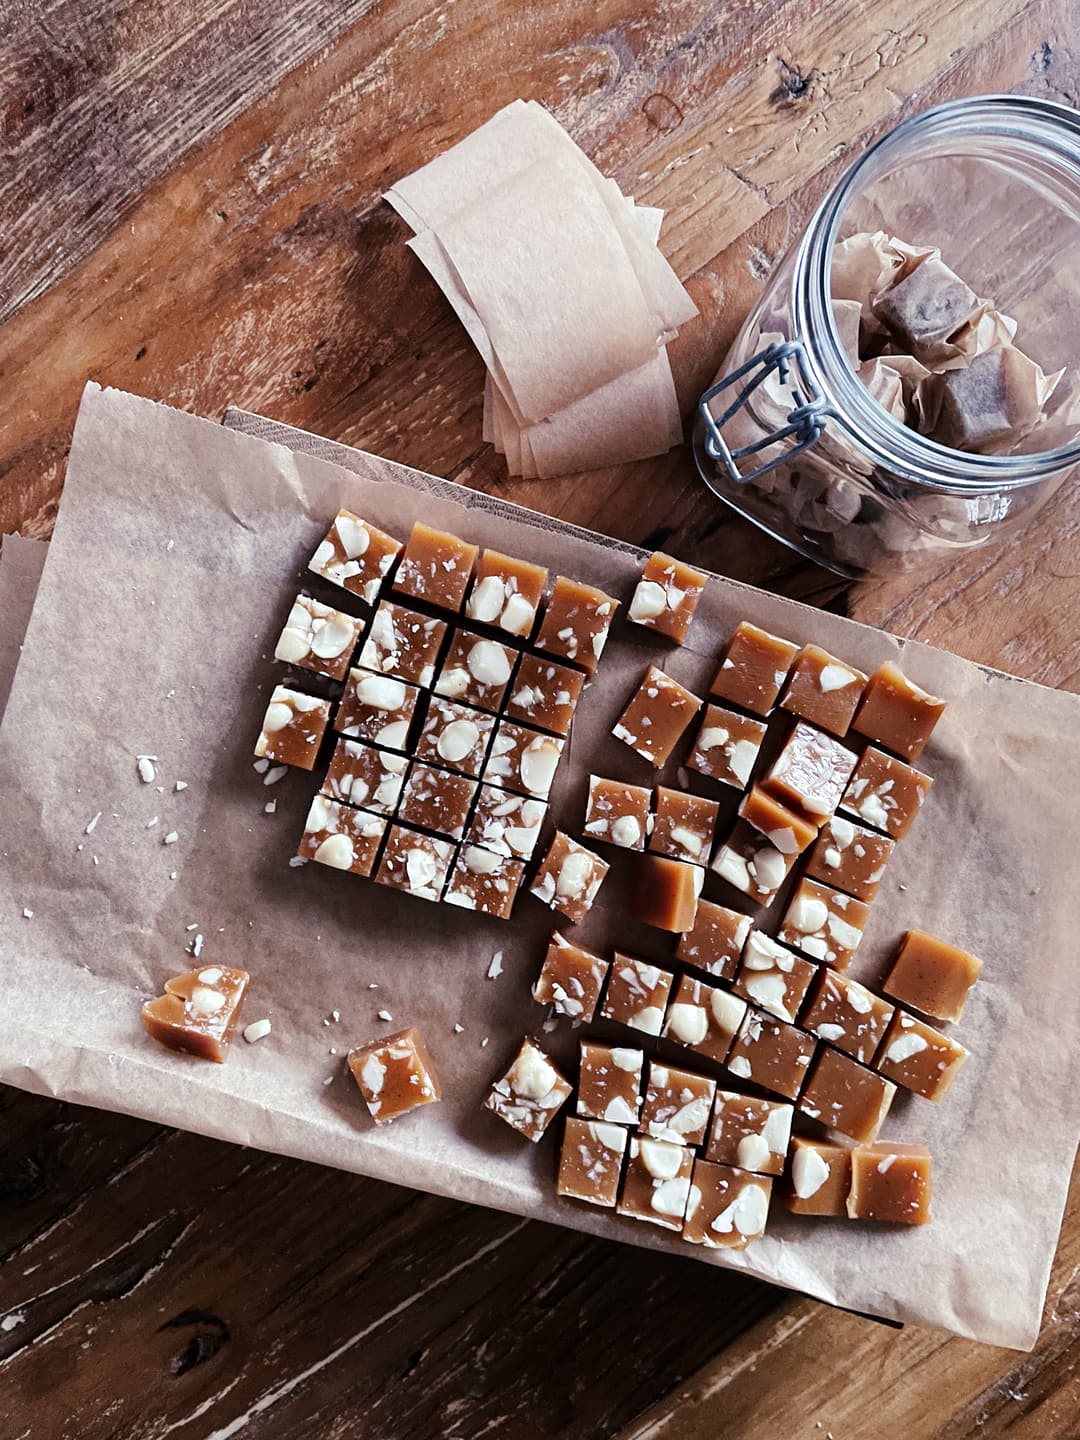 Chopped up pieces of caramel candy, laying on baking paper. There’s also a glass jar with wrapped candies and wrapping paper.